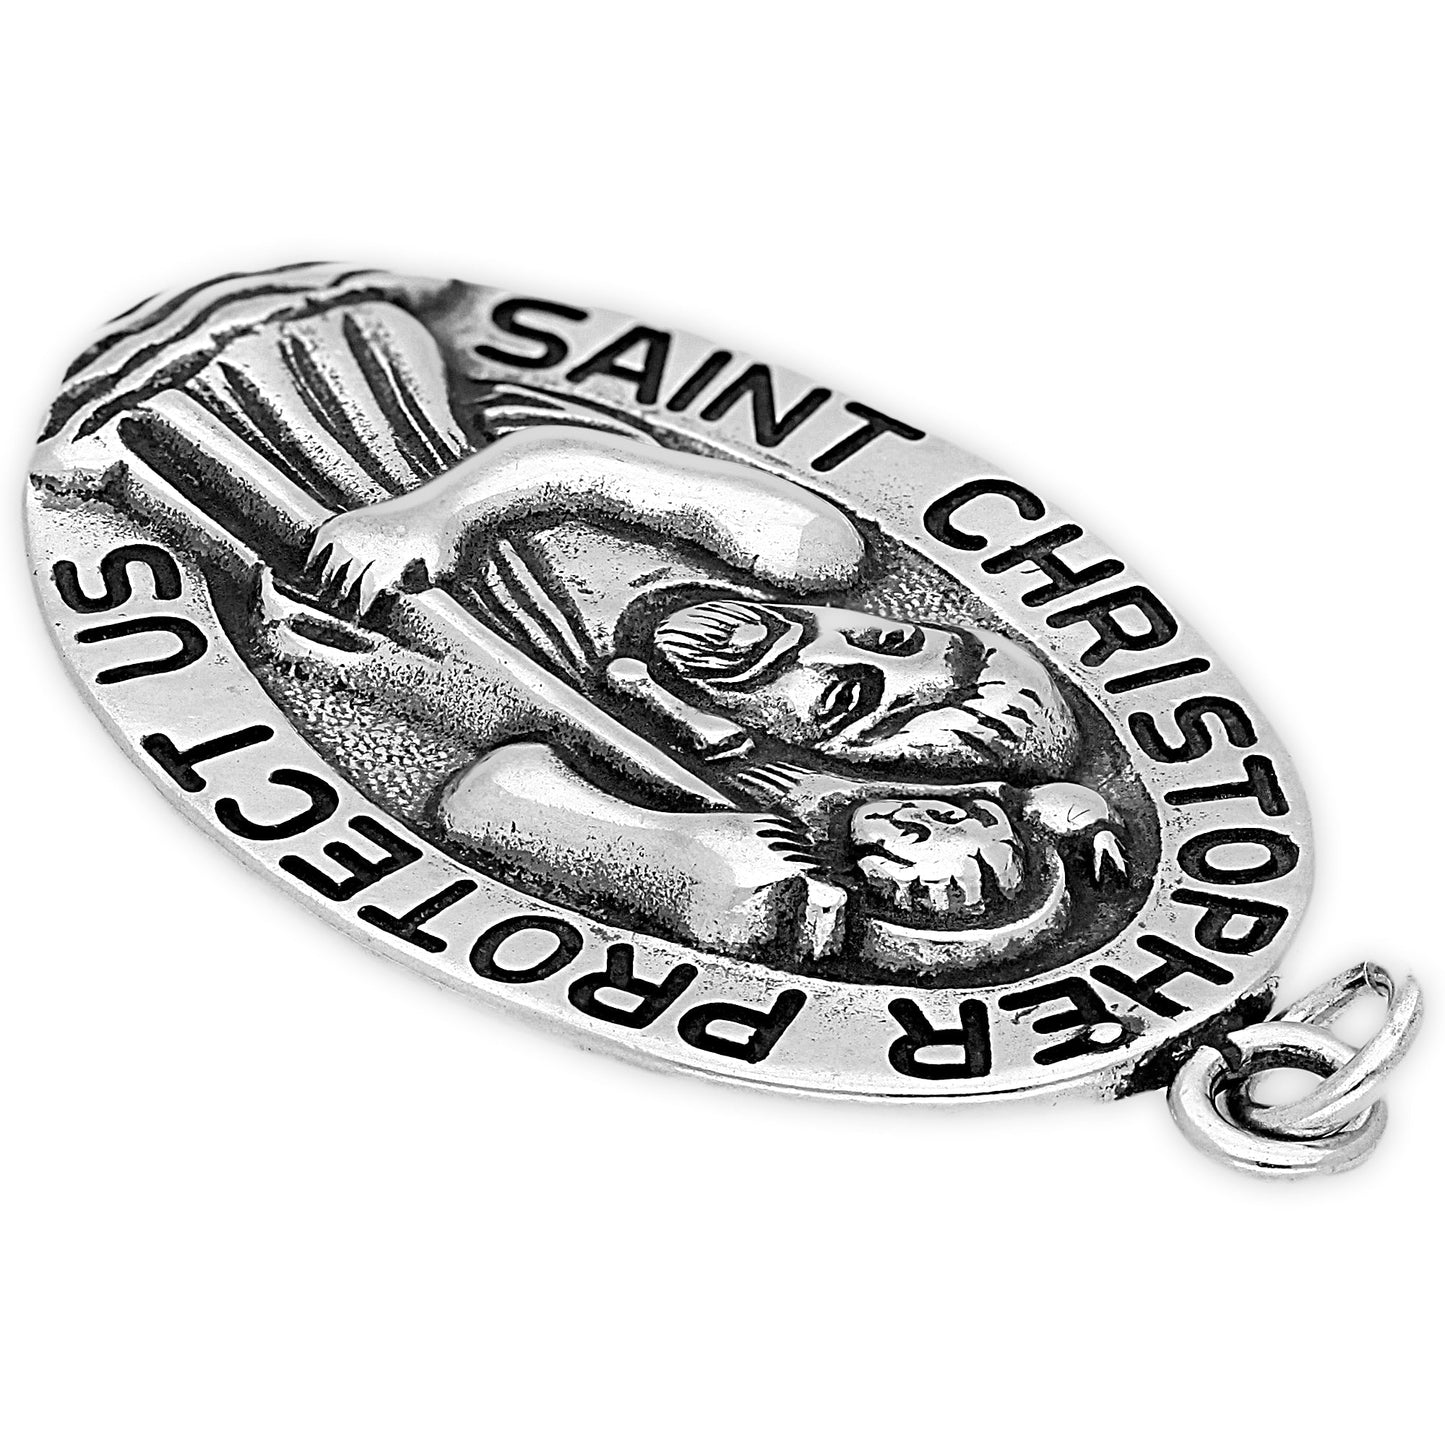 Sterling Silver Large St Christopher Charm